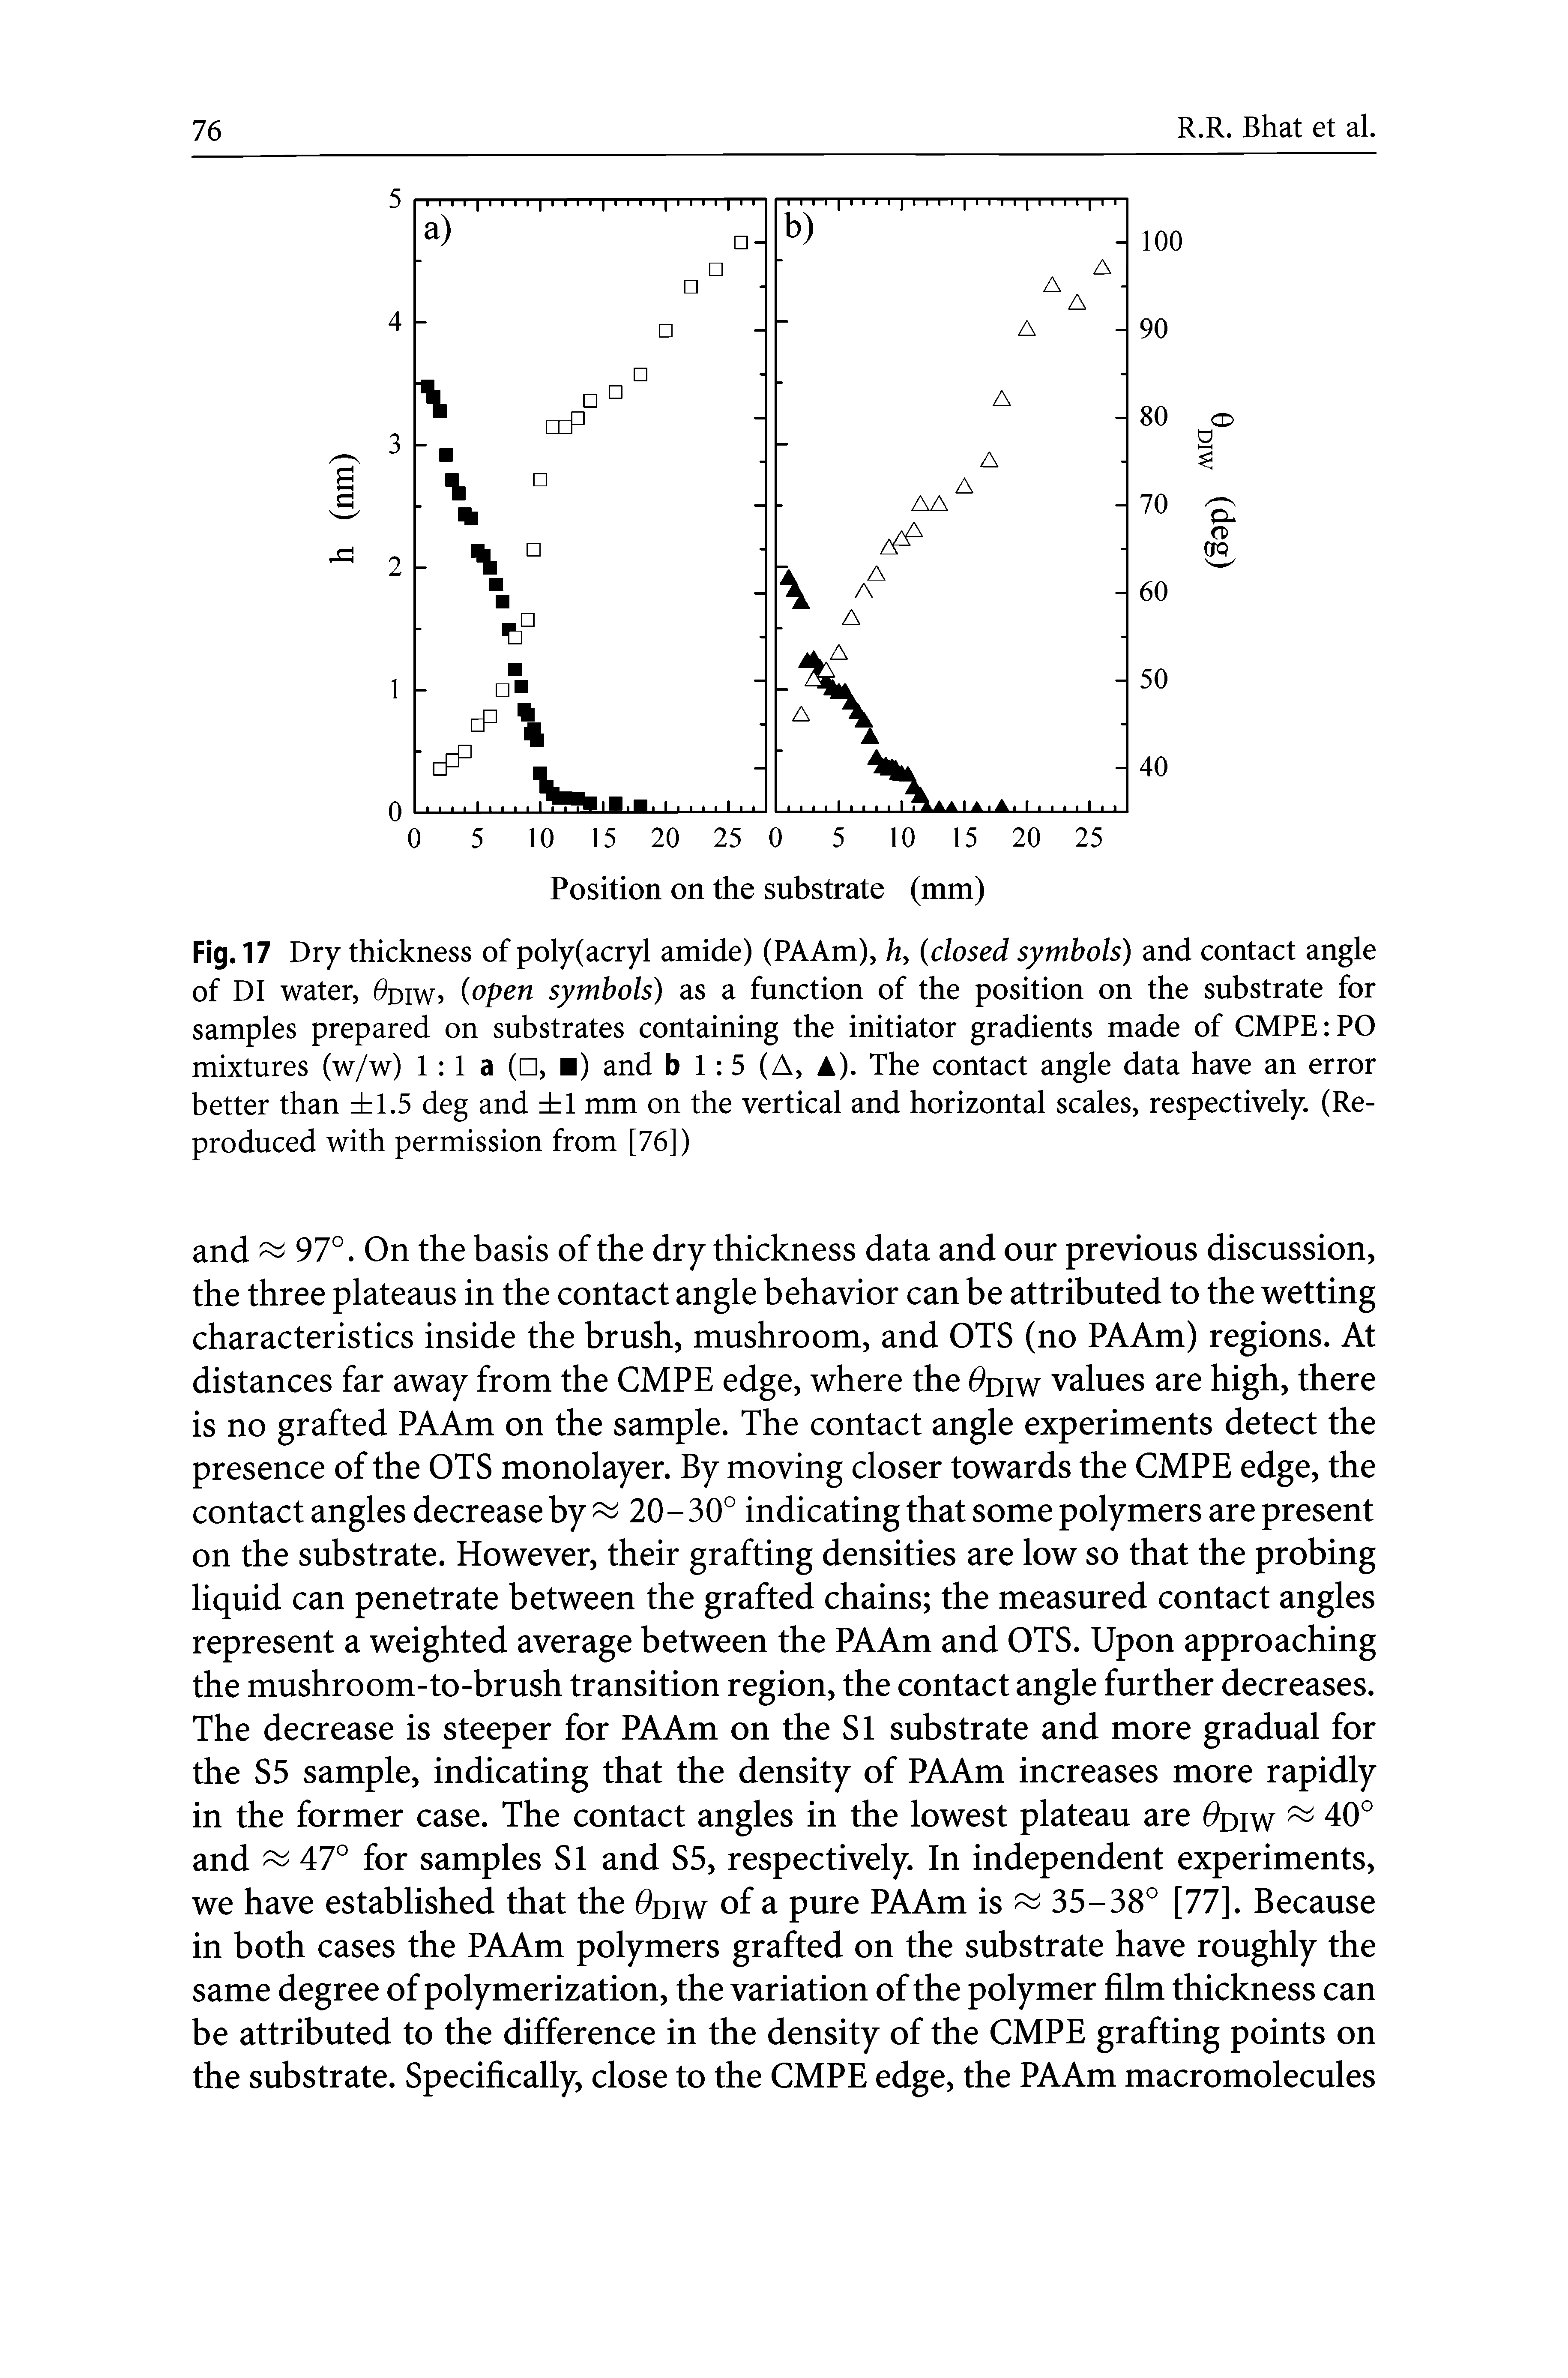 Fig. 17 Dry thickness of poly(acryl amide) (PAAm), /z, (closed symbols) and contact angle of DI water, 6>diw> (open symbols) as a function of the position on the substrate for samples prepared on substrates containing the initiator gradients made of CMPEiPO mixtures (w/w) 1 1 a ( , ) and b 1 5 (A, A). The contact angle data have an error better than 1.5 deg and 1 mm on the vertical and horizontal scales, respectively. (Reproduced with permission from [76])...